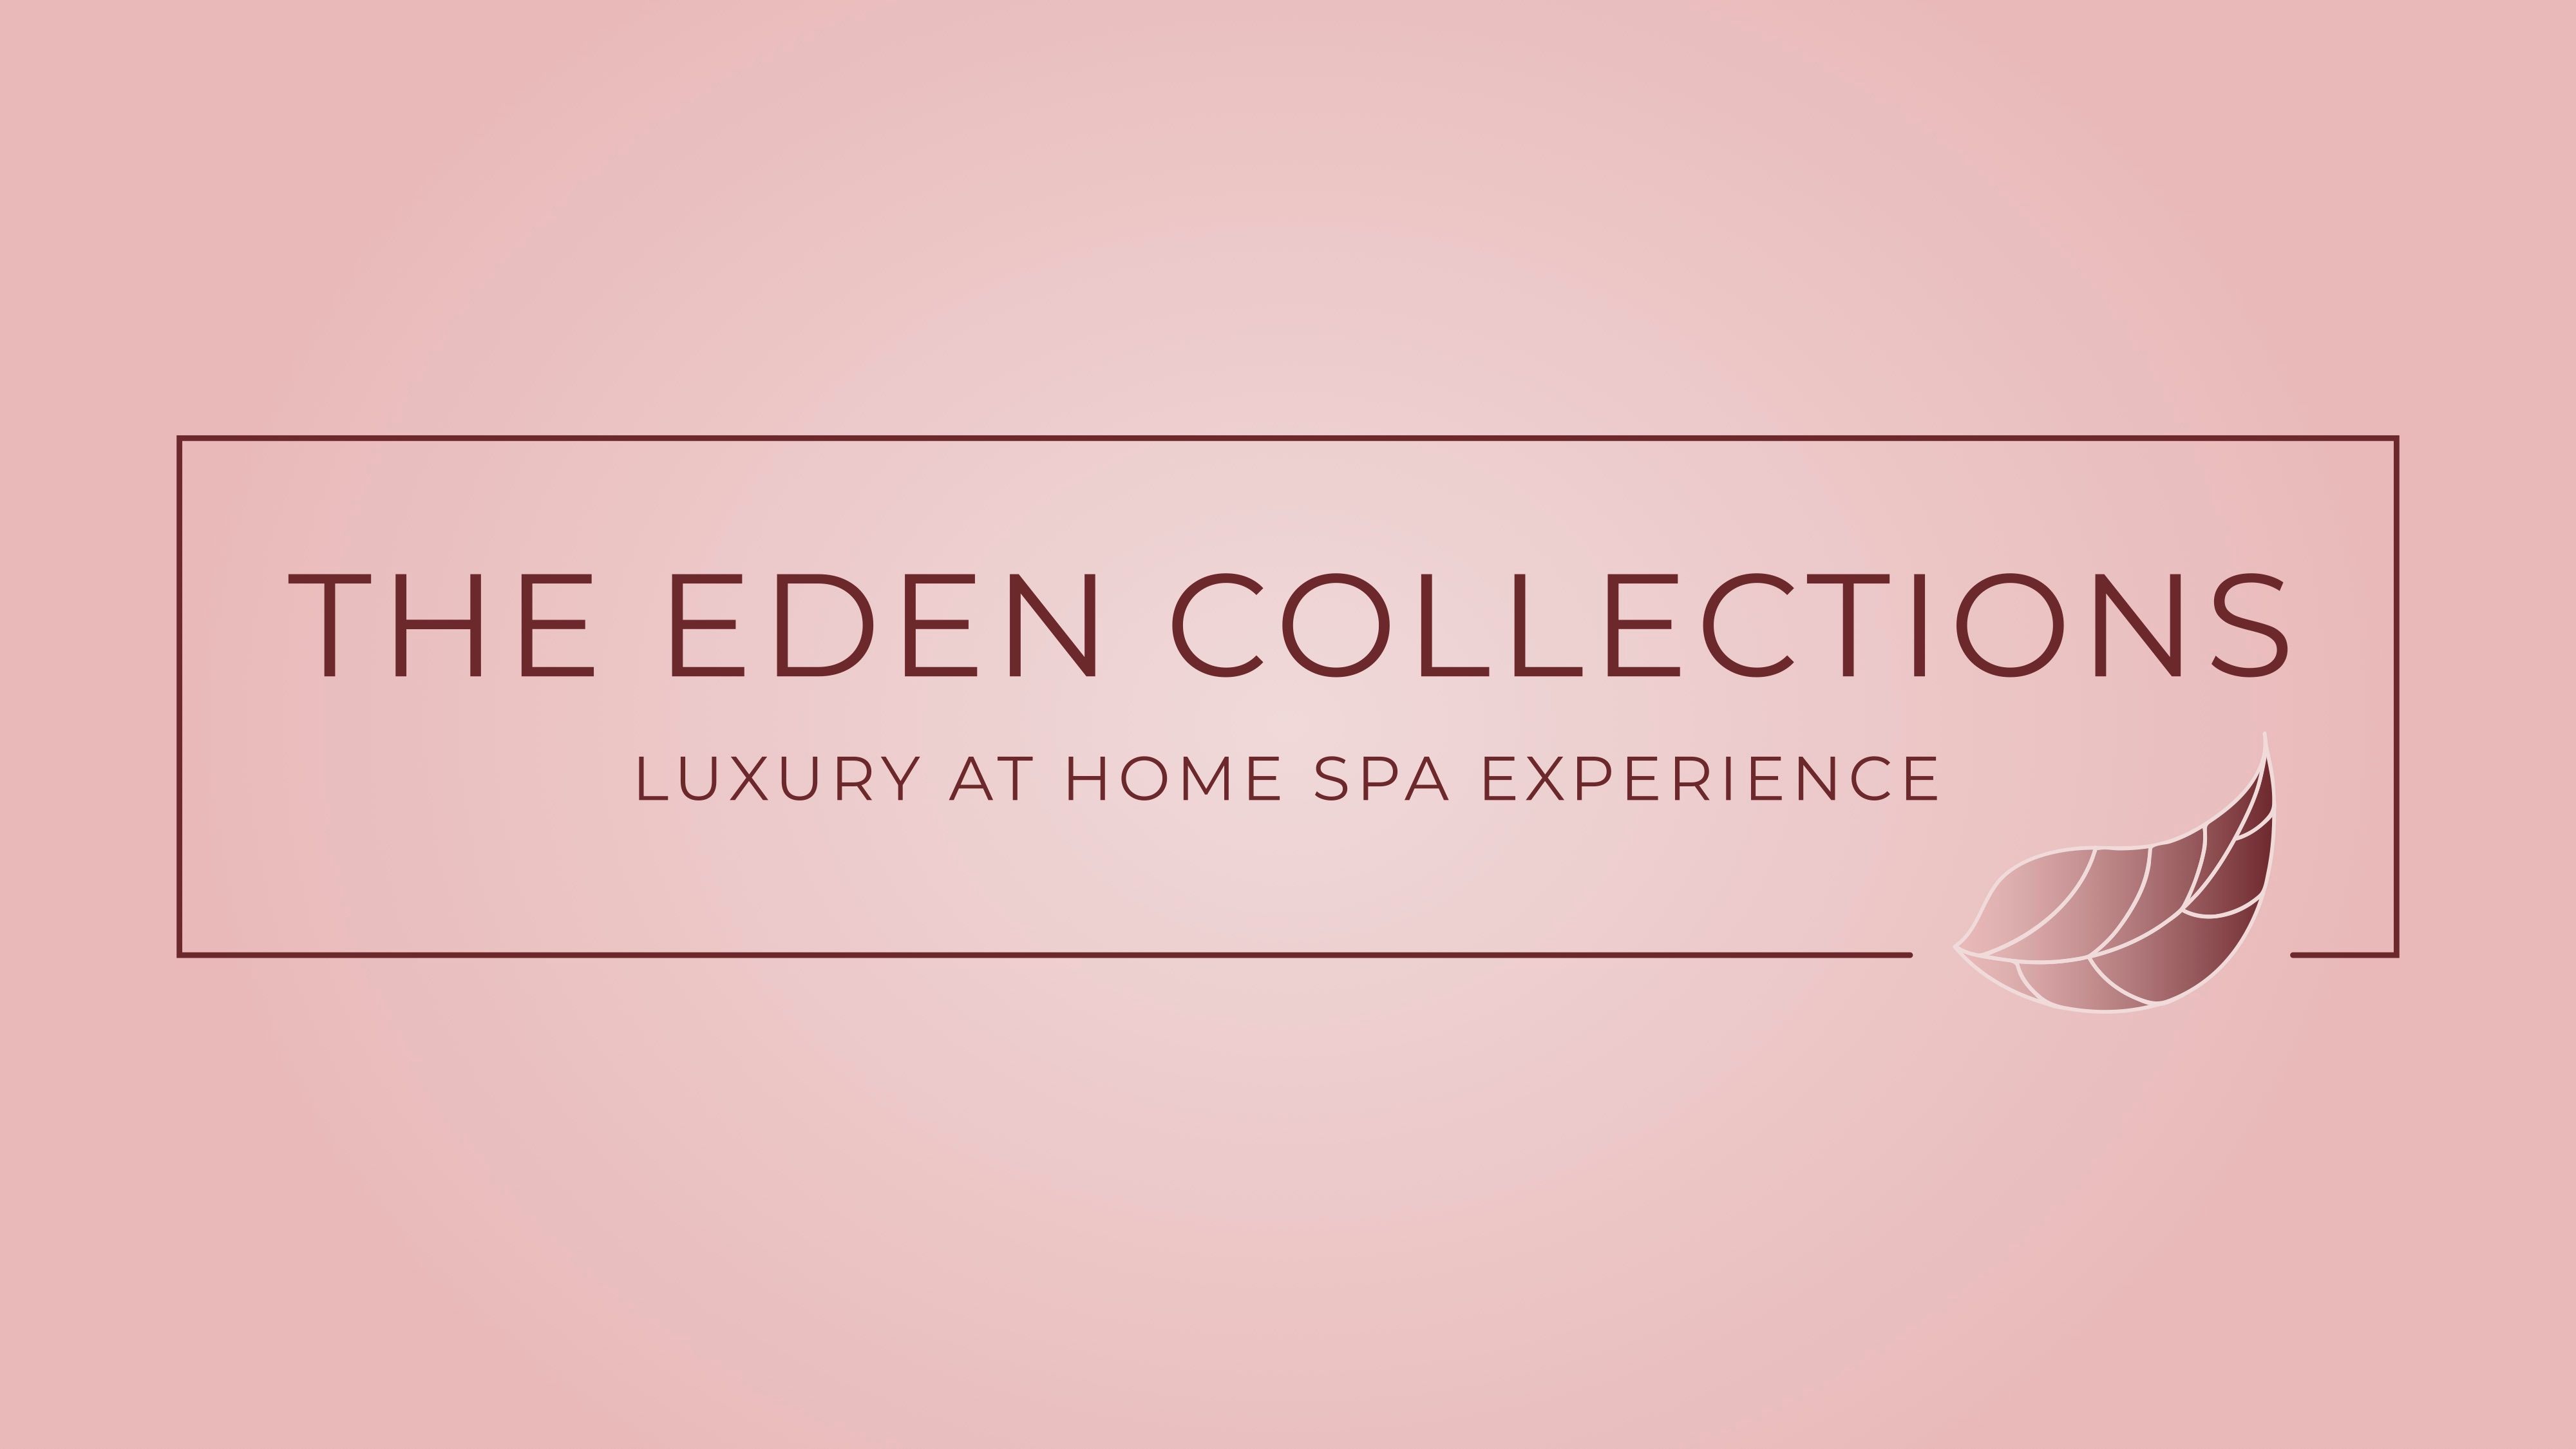 The Eden Collections